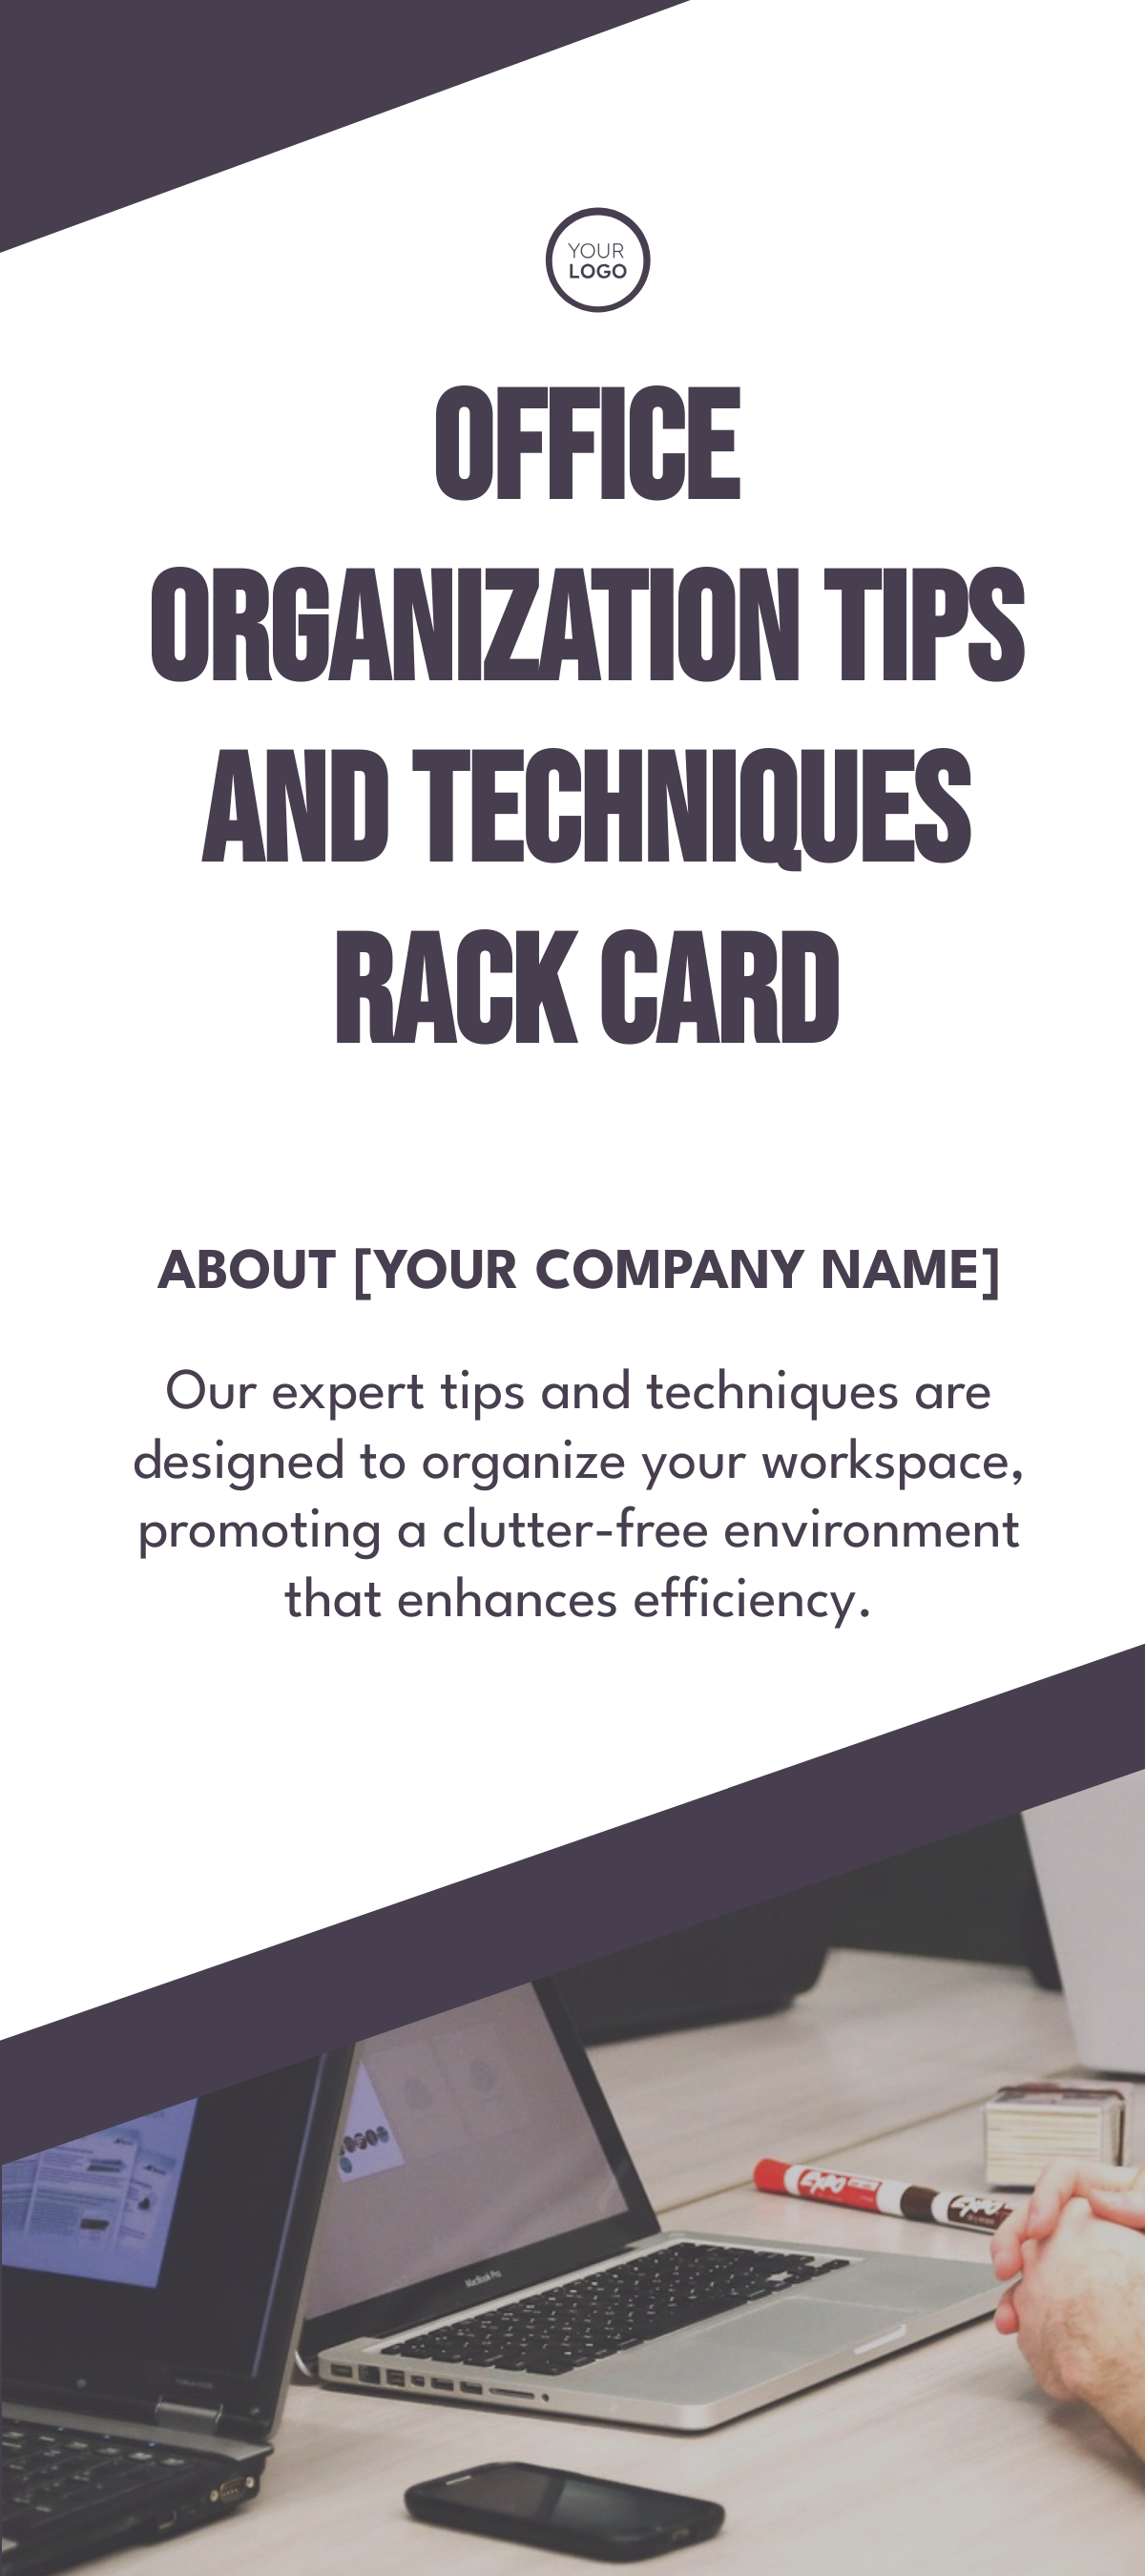 Office Organization Tips and Techniques Rack Card Template